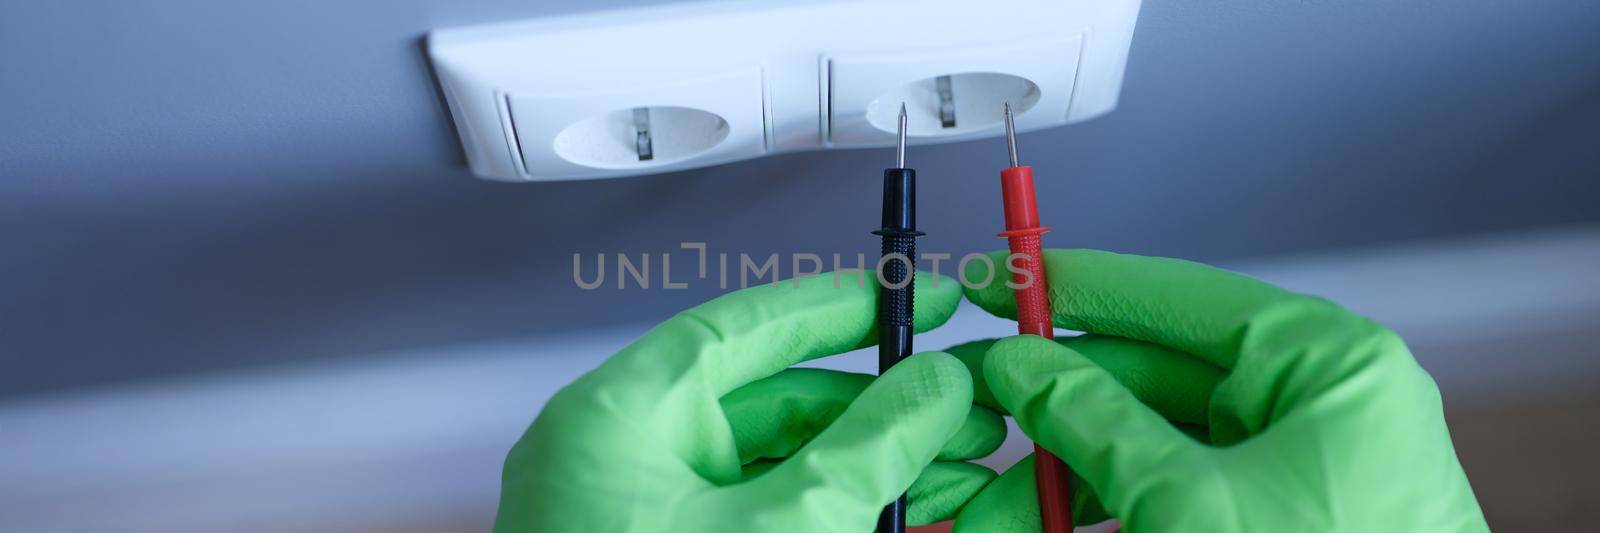 Gloved hands are holding a digital multimeter near the socket by kuprevich